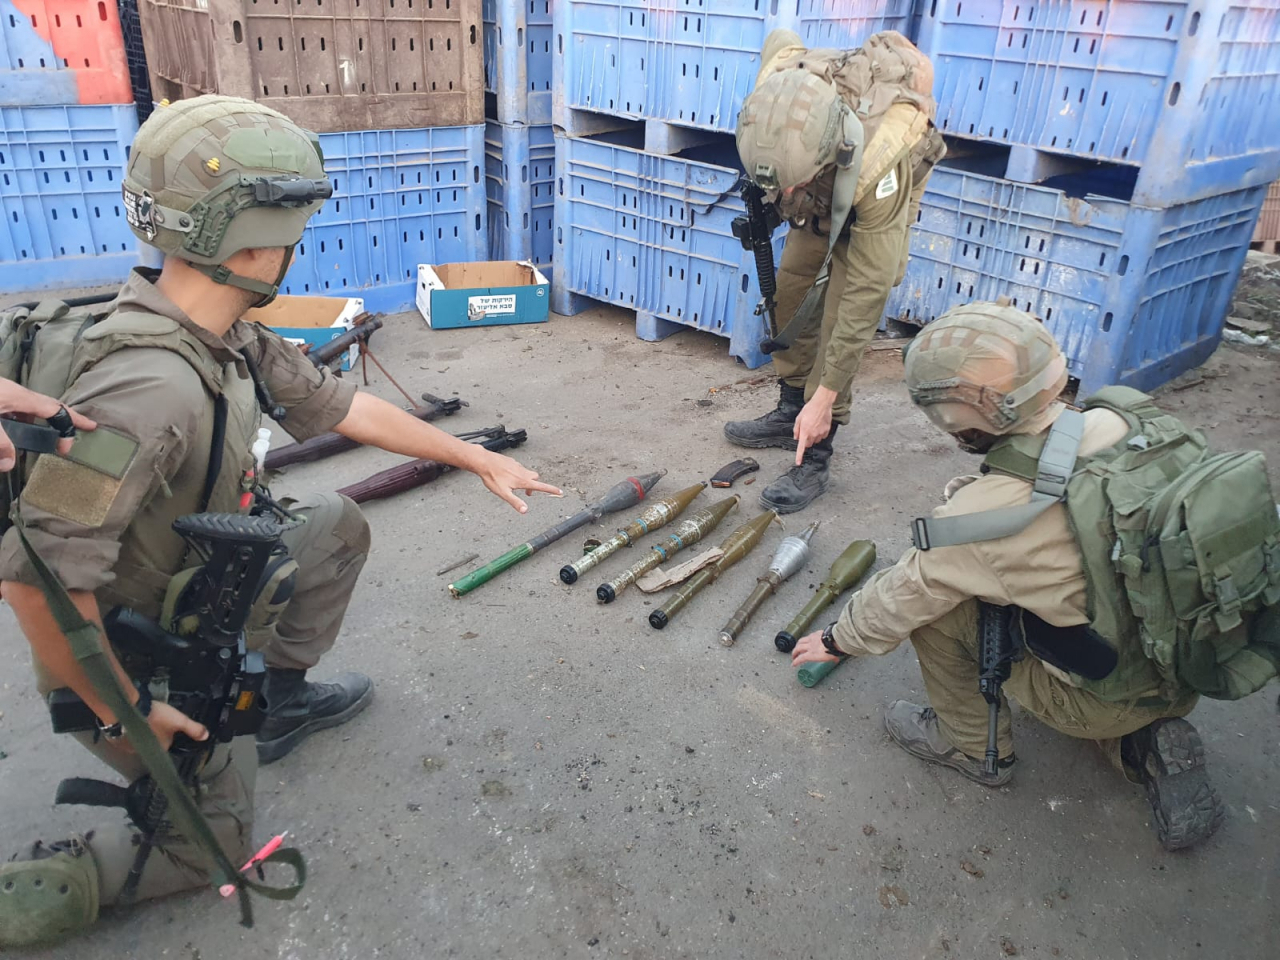 Israeli soldiers point to the weapons seized from Hamas. The item on the far left with red trimming is believed to be a North Korean-made F-7 rocket in the photo released by the Israel Defense Forces on Oct. 11. (IDF)